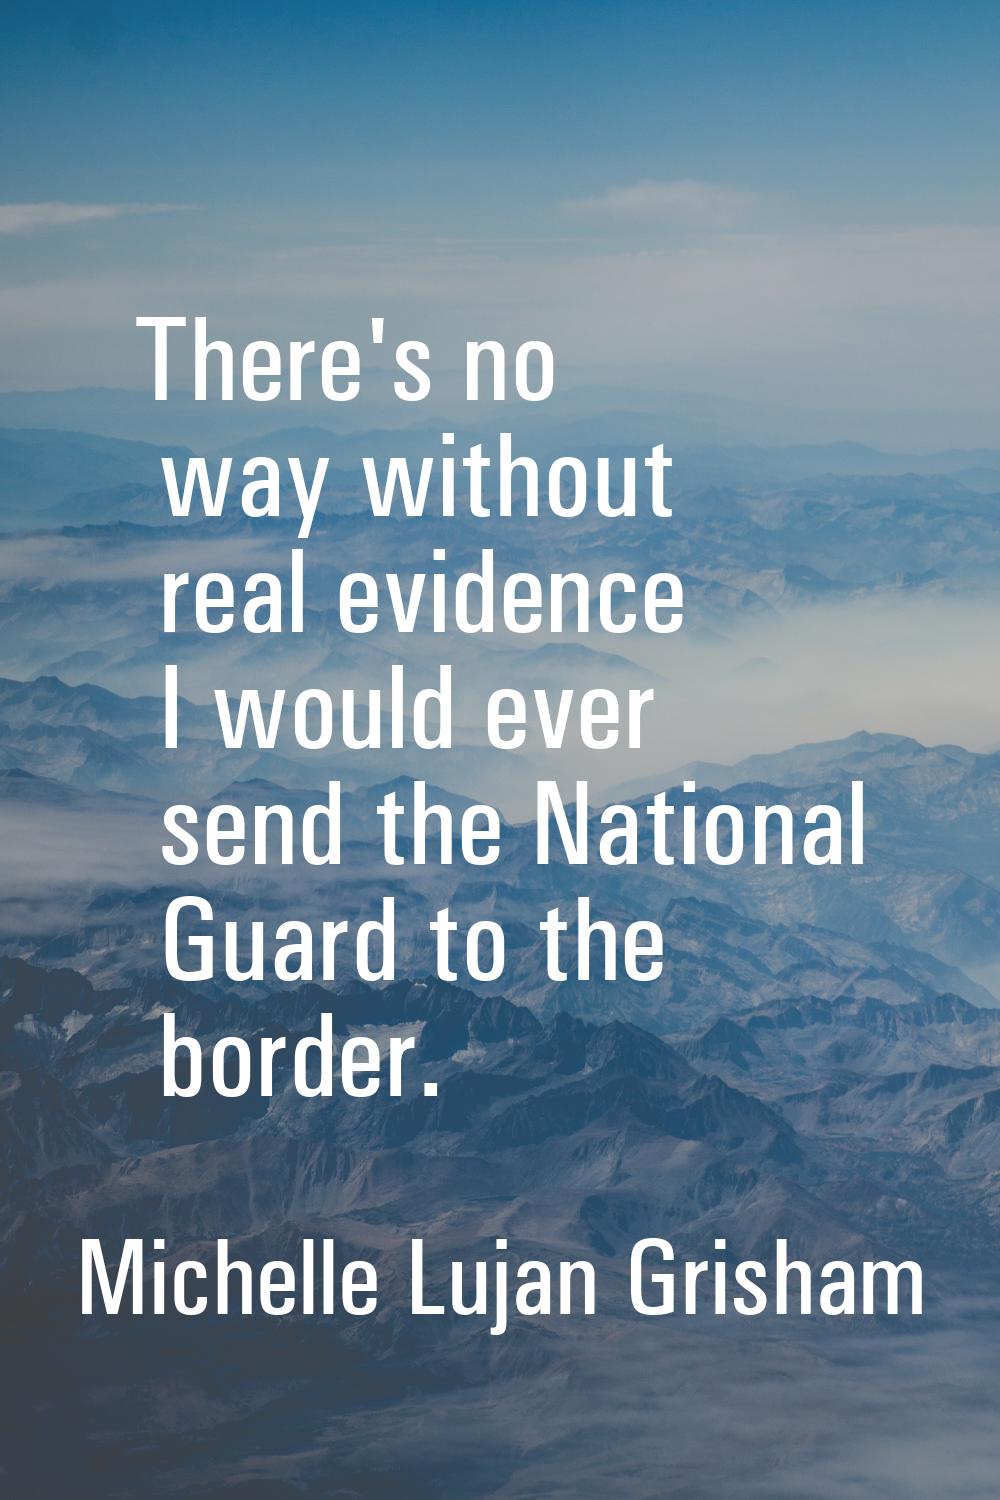 There's no way without real evidence I would ever send the National Guard to the border.